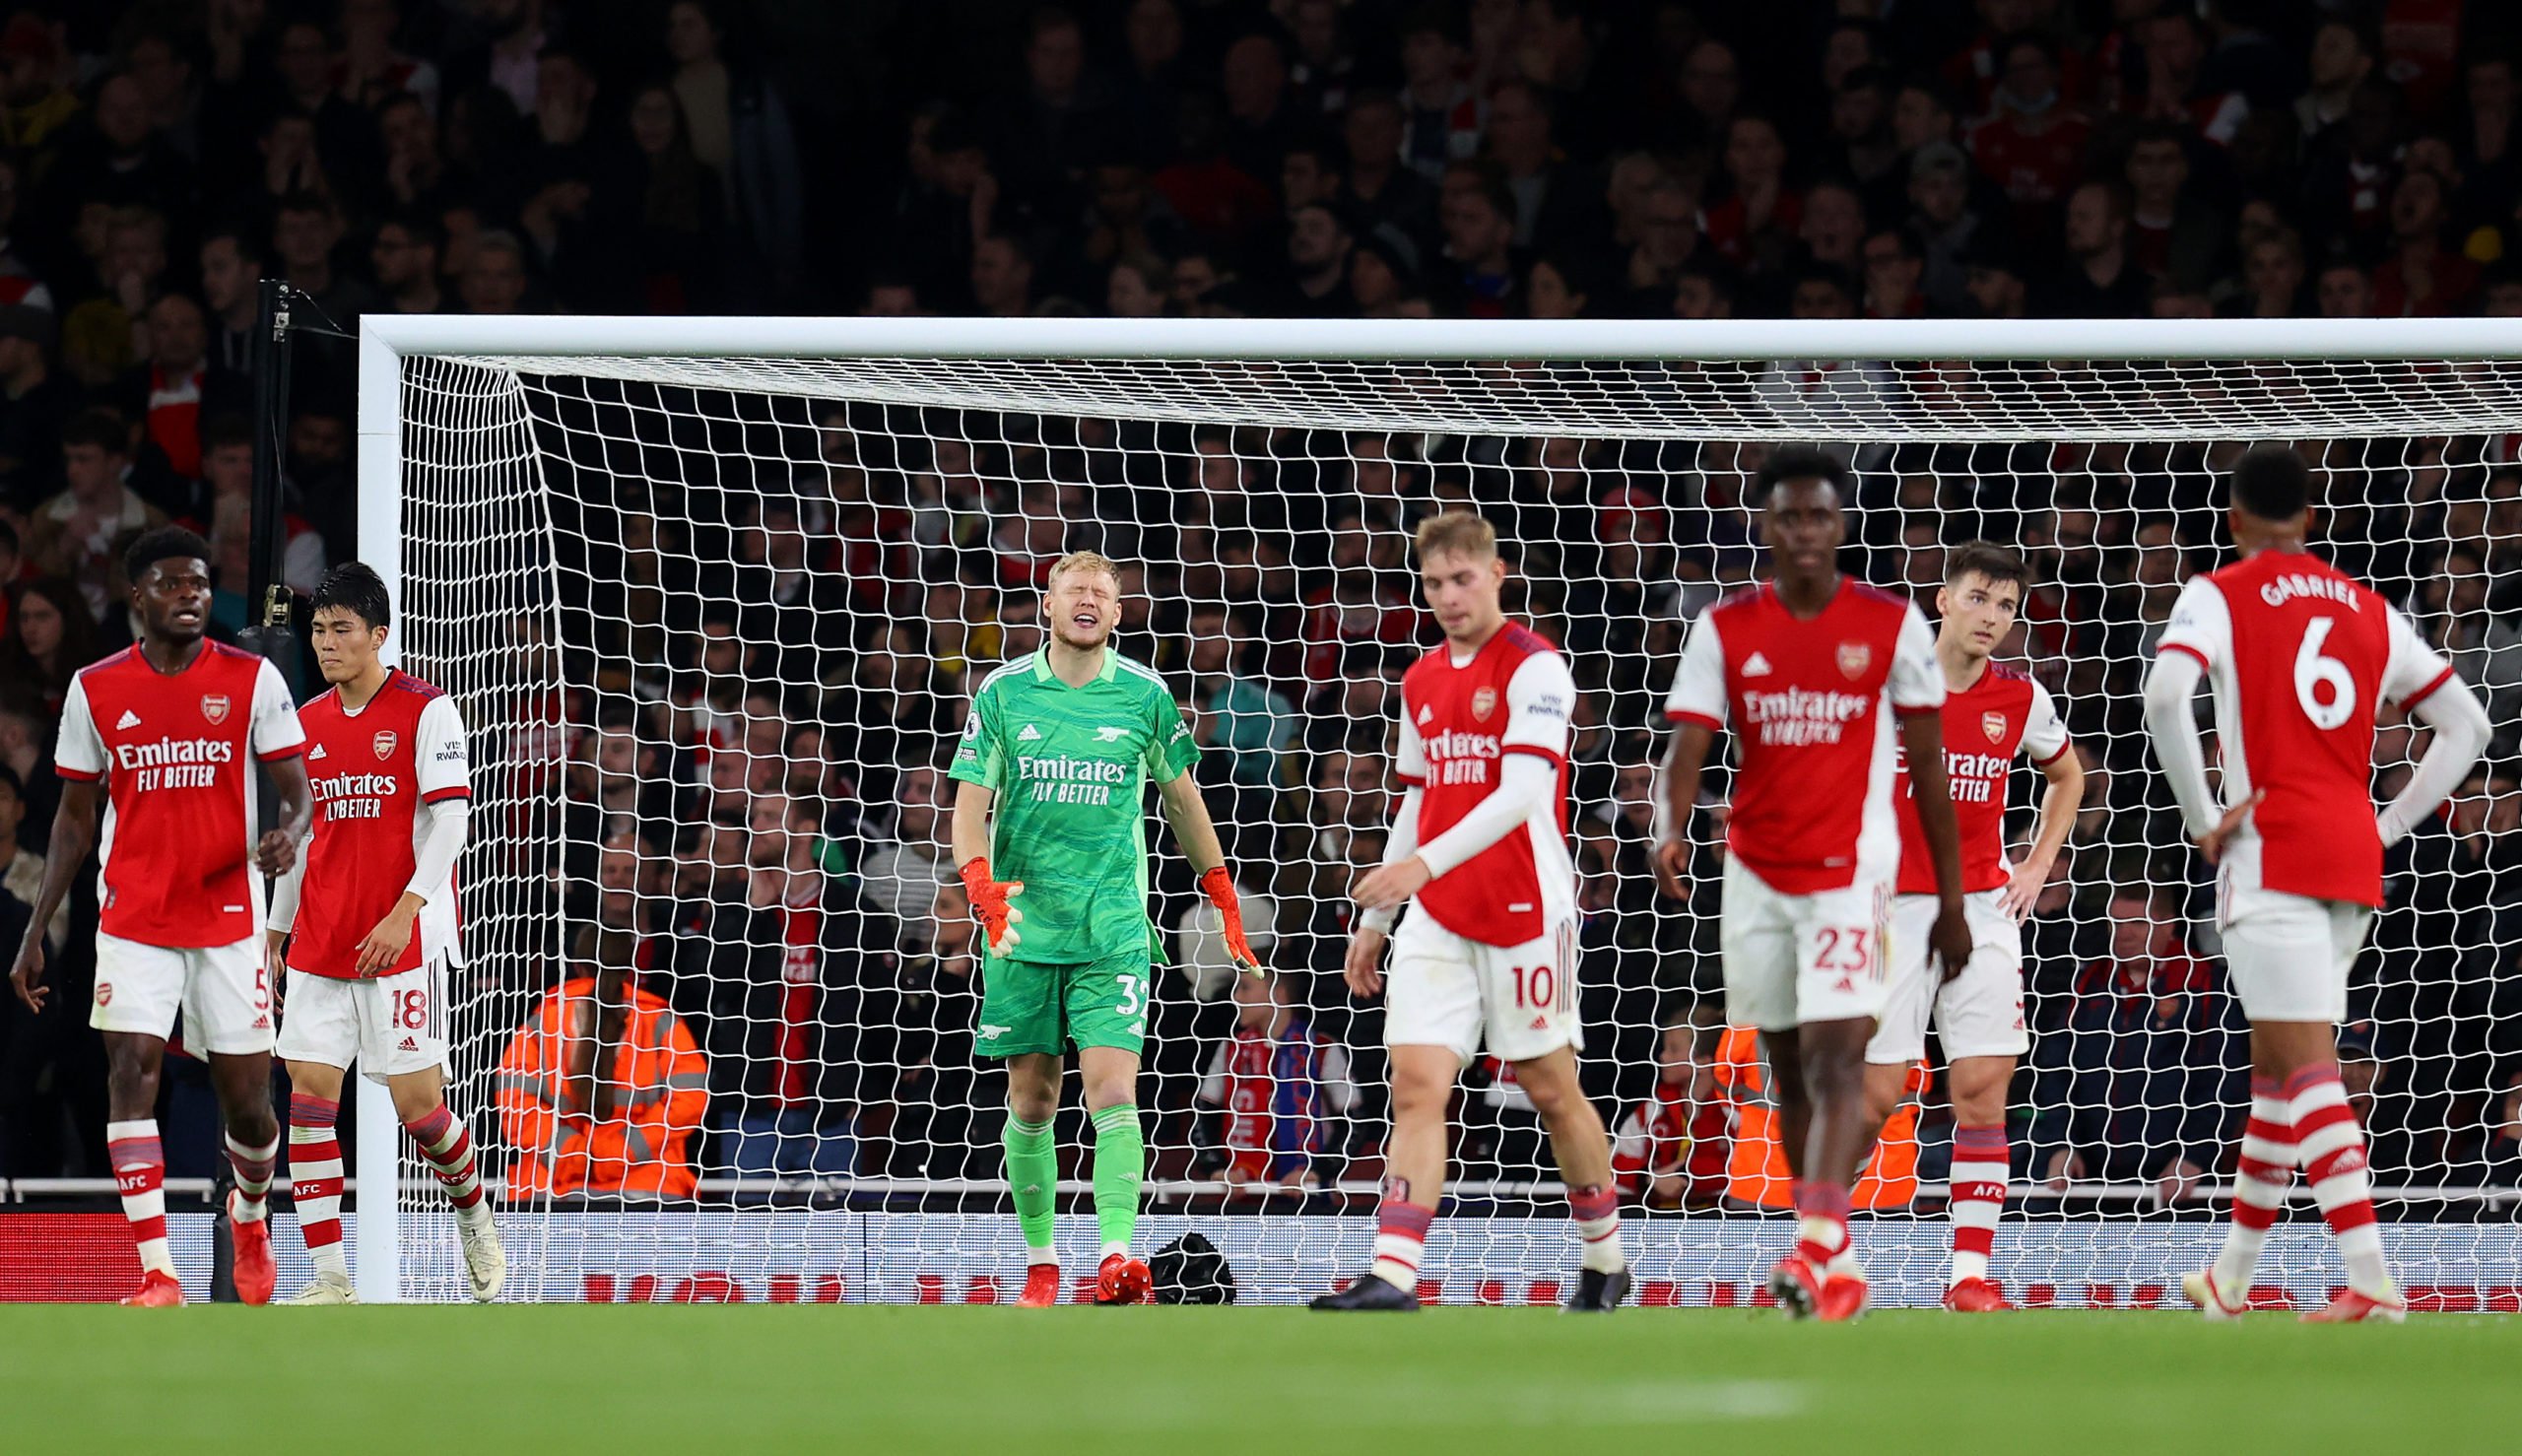 LONDON, ENGLAND - OCTOBER 18:  Aaron Ramsdale of Arsenal and his teammates look dejected after conceding their 2nd goal during the Premier League match between Arsenal and Crystal Palace at Emirates Stadium on October 18, 2021 in London, England. (Photo by Catherine Ivill/Getty Images)